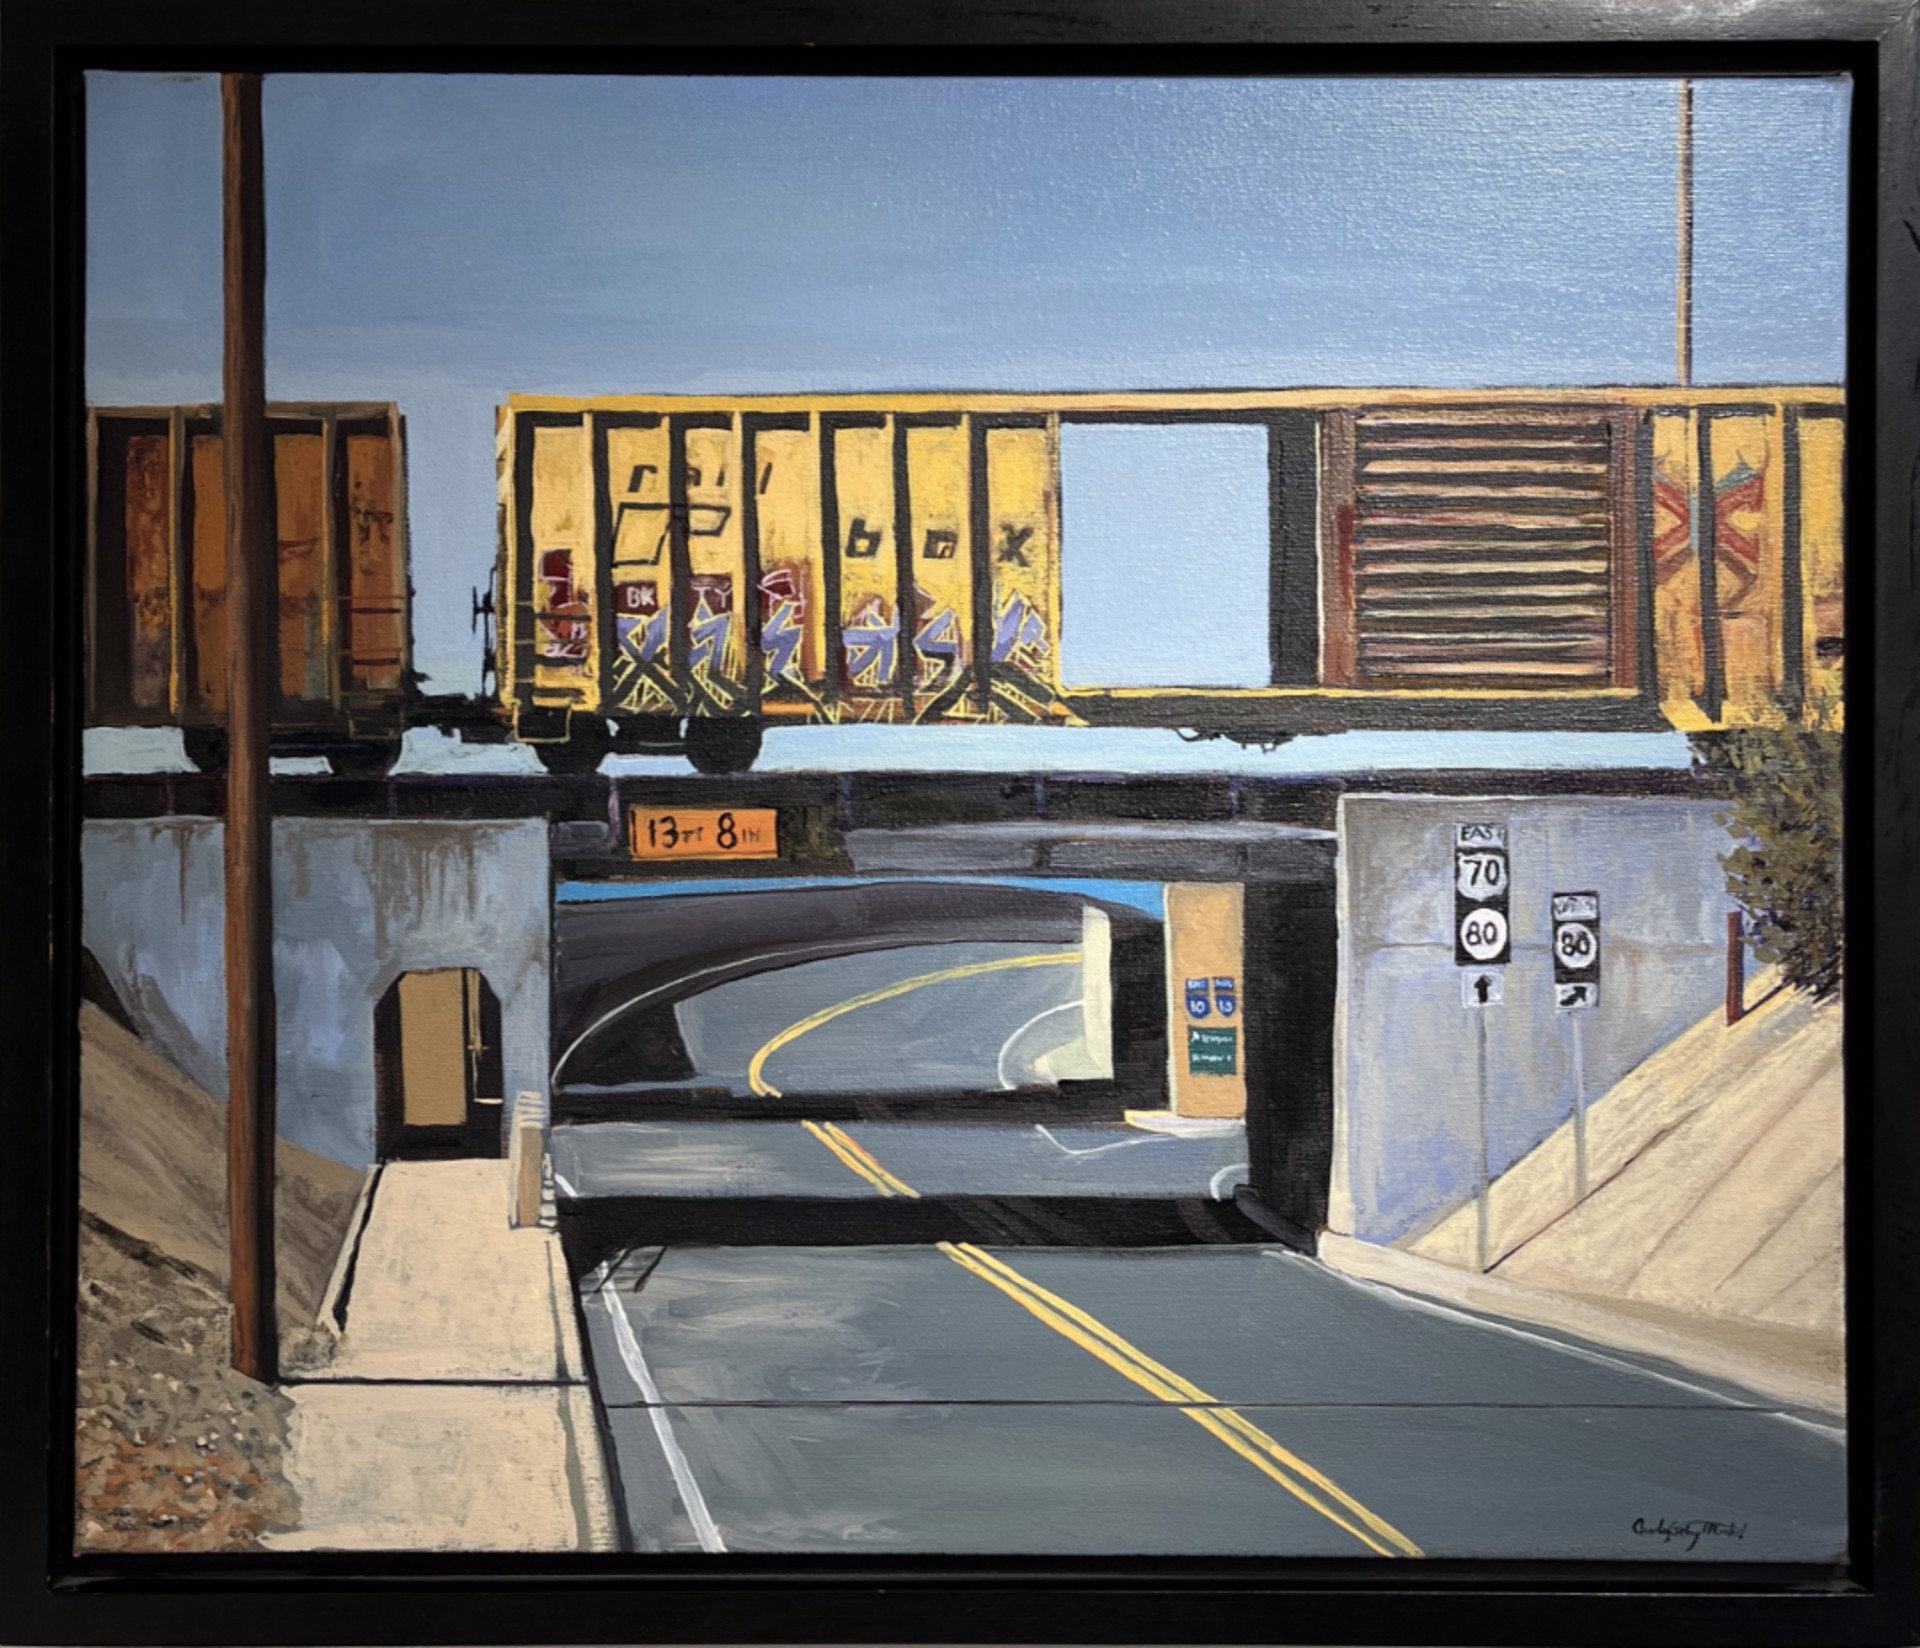 The Overpass by Charlie Meckel